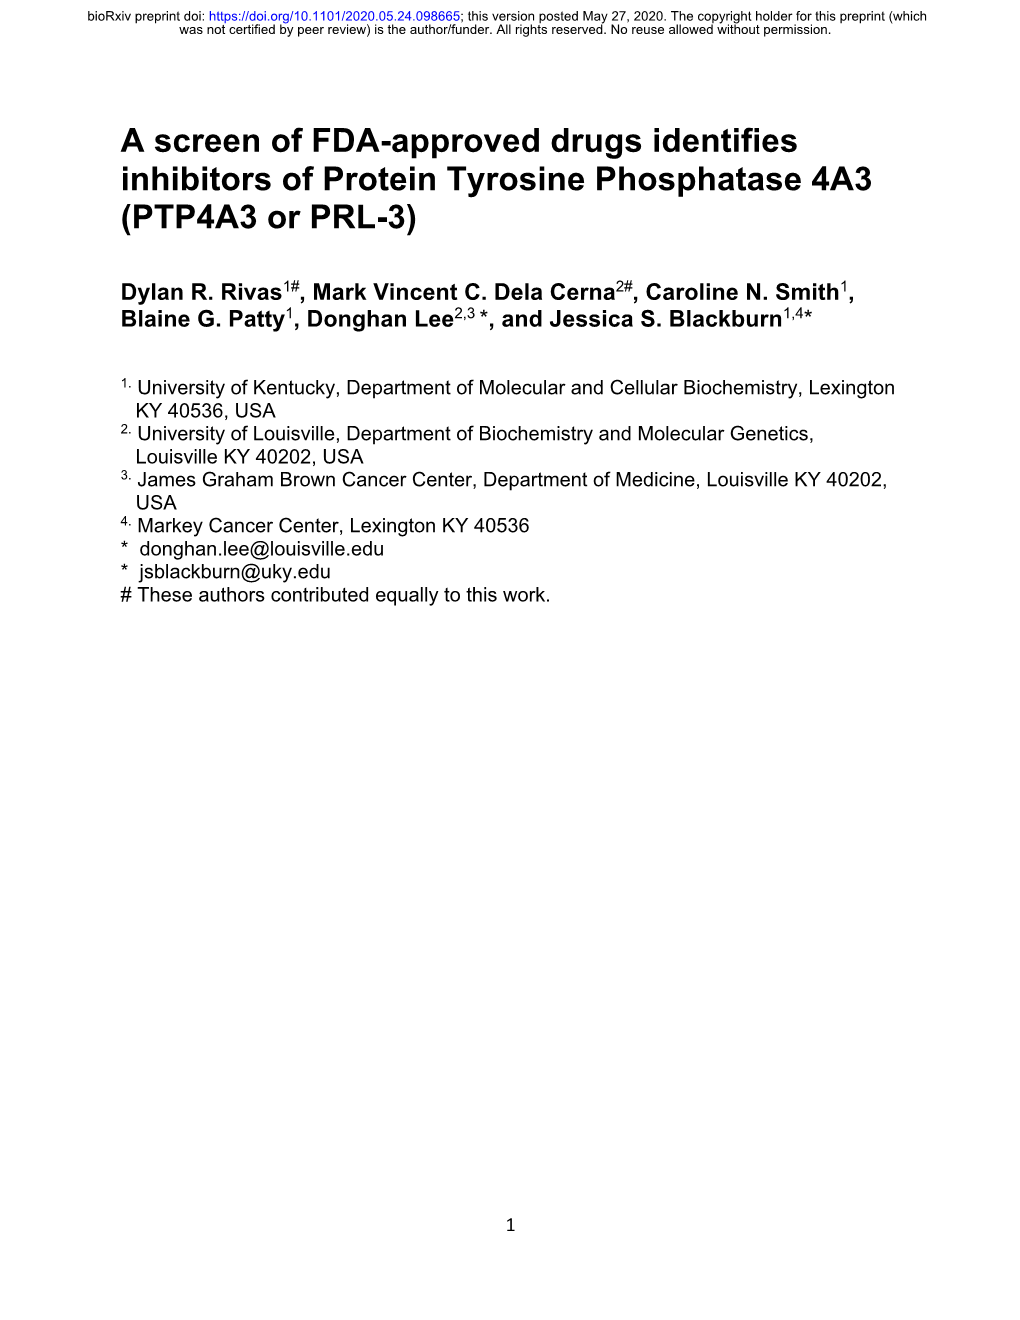 A Screen of FDA-Approved Drugs Identifies Inhibitors of Protein Tyrosine Phosphatase 4A3 (PTP4A3 Or PRL-3)